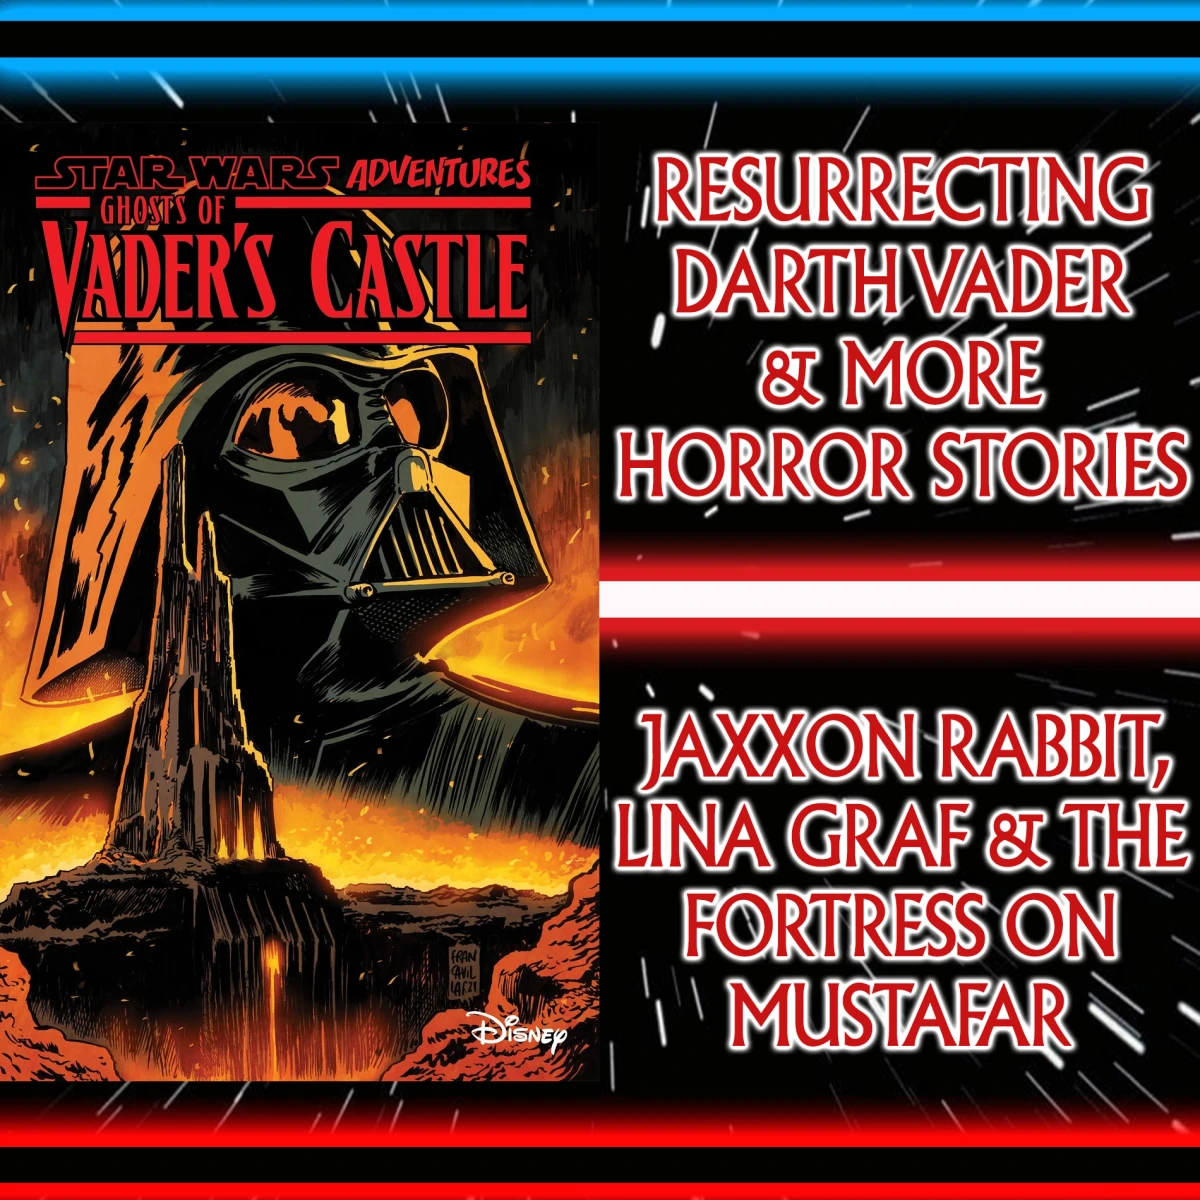 Star Wars: Comics In Canon – Ghosts Of Vader’s Castle: Resurrecting Darth Vader: Jaxxon Rabbit, Lina Graf & The Mustafar Fortress With More Horror Stories – Ep 112